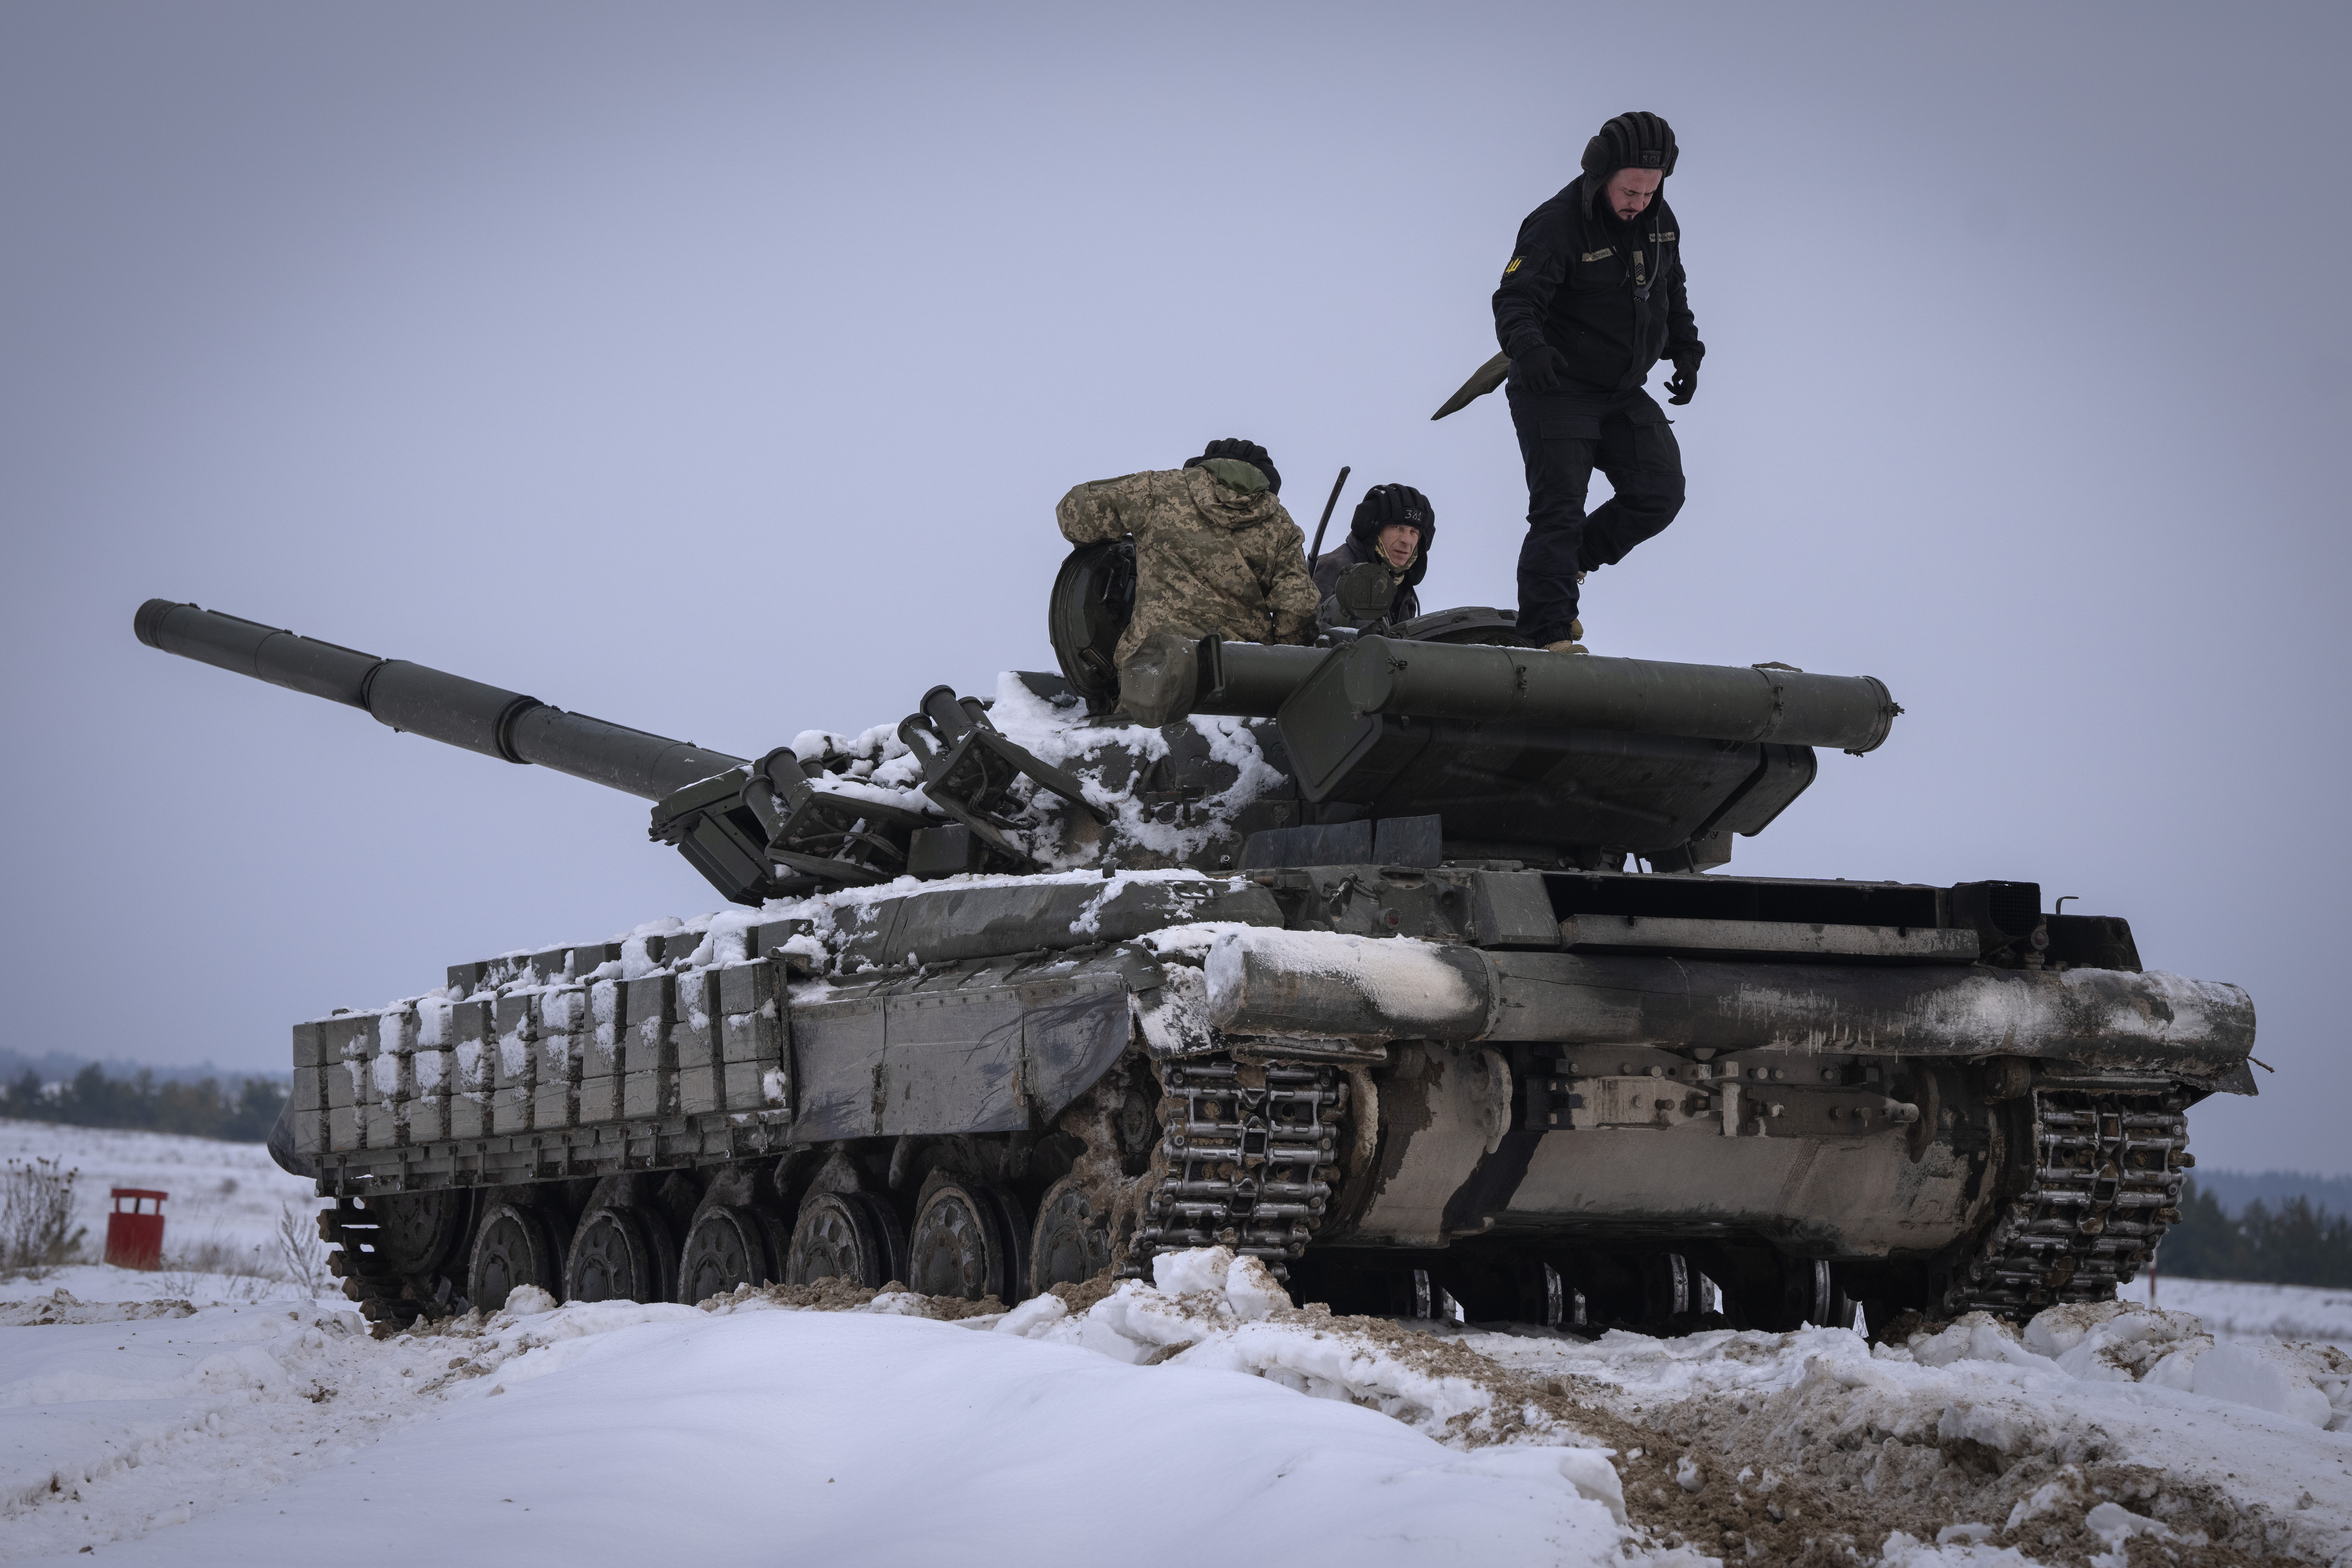 Gloomy mood hangs over Ukraine soldiers as war with Russia grinds on